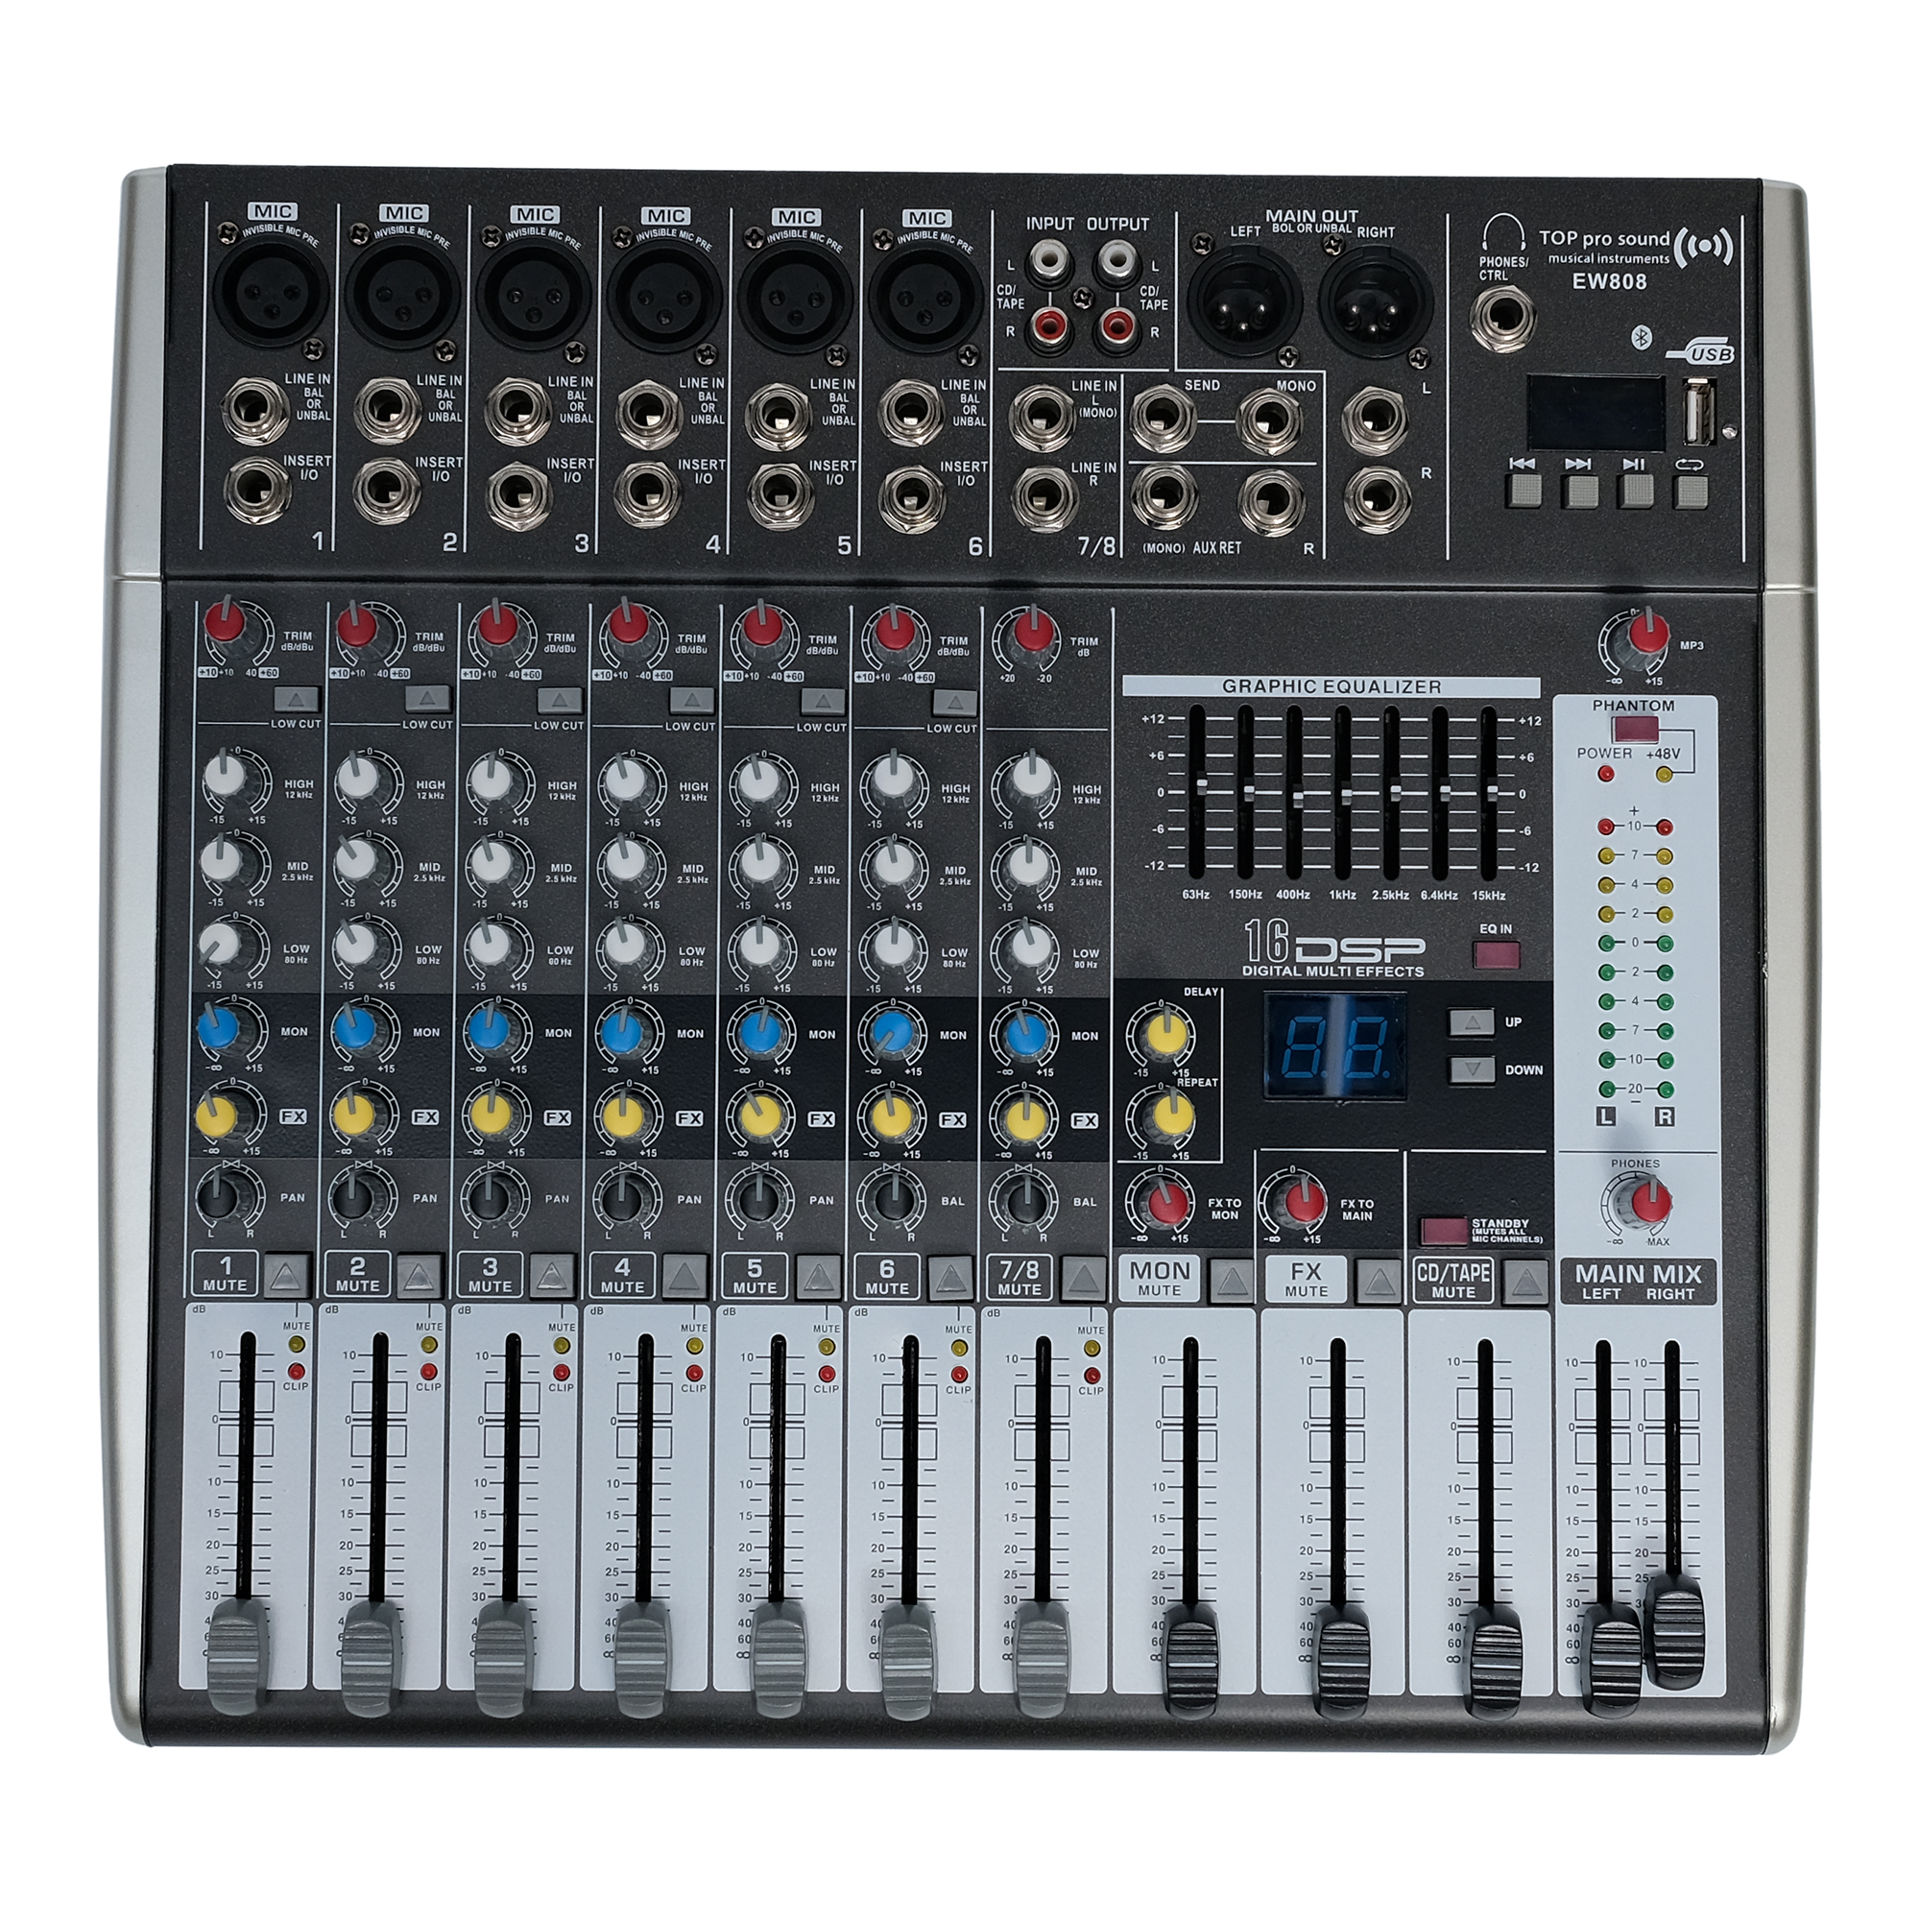 Shop TOP PRO Top Pro DSP Echo Professional Mixer with 8 Channel, EW808 ...